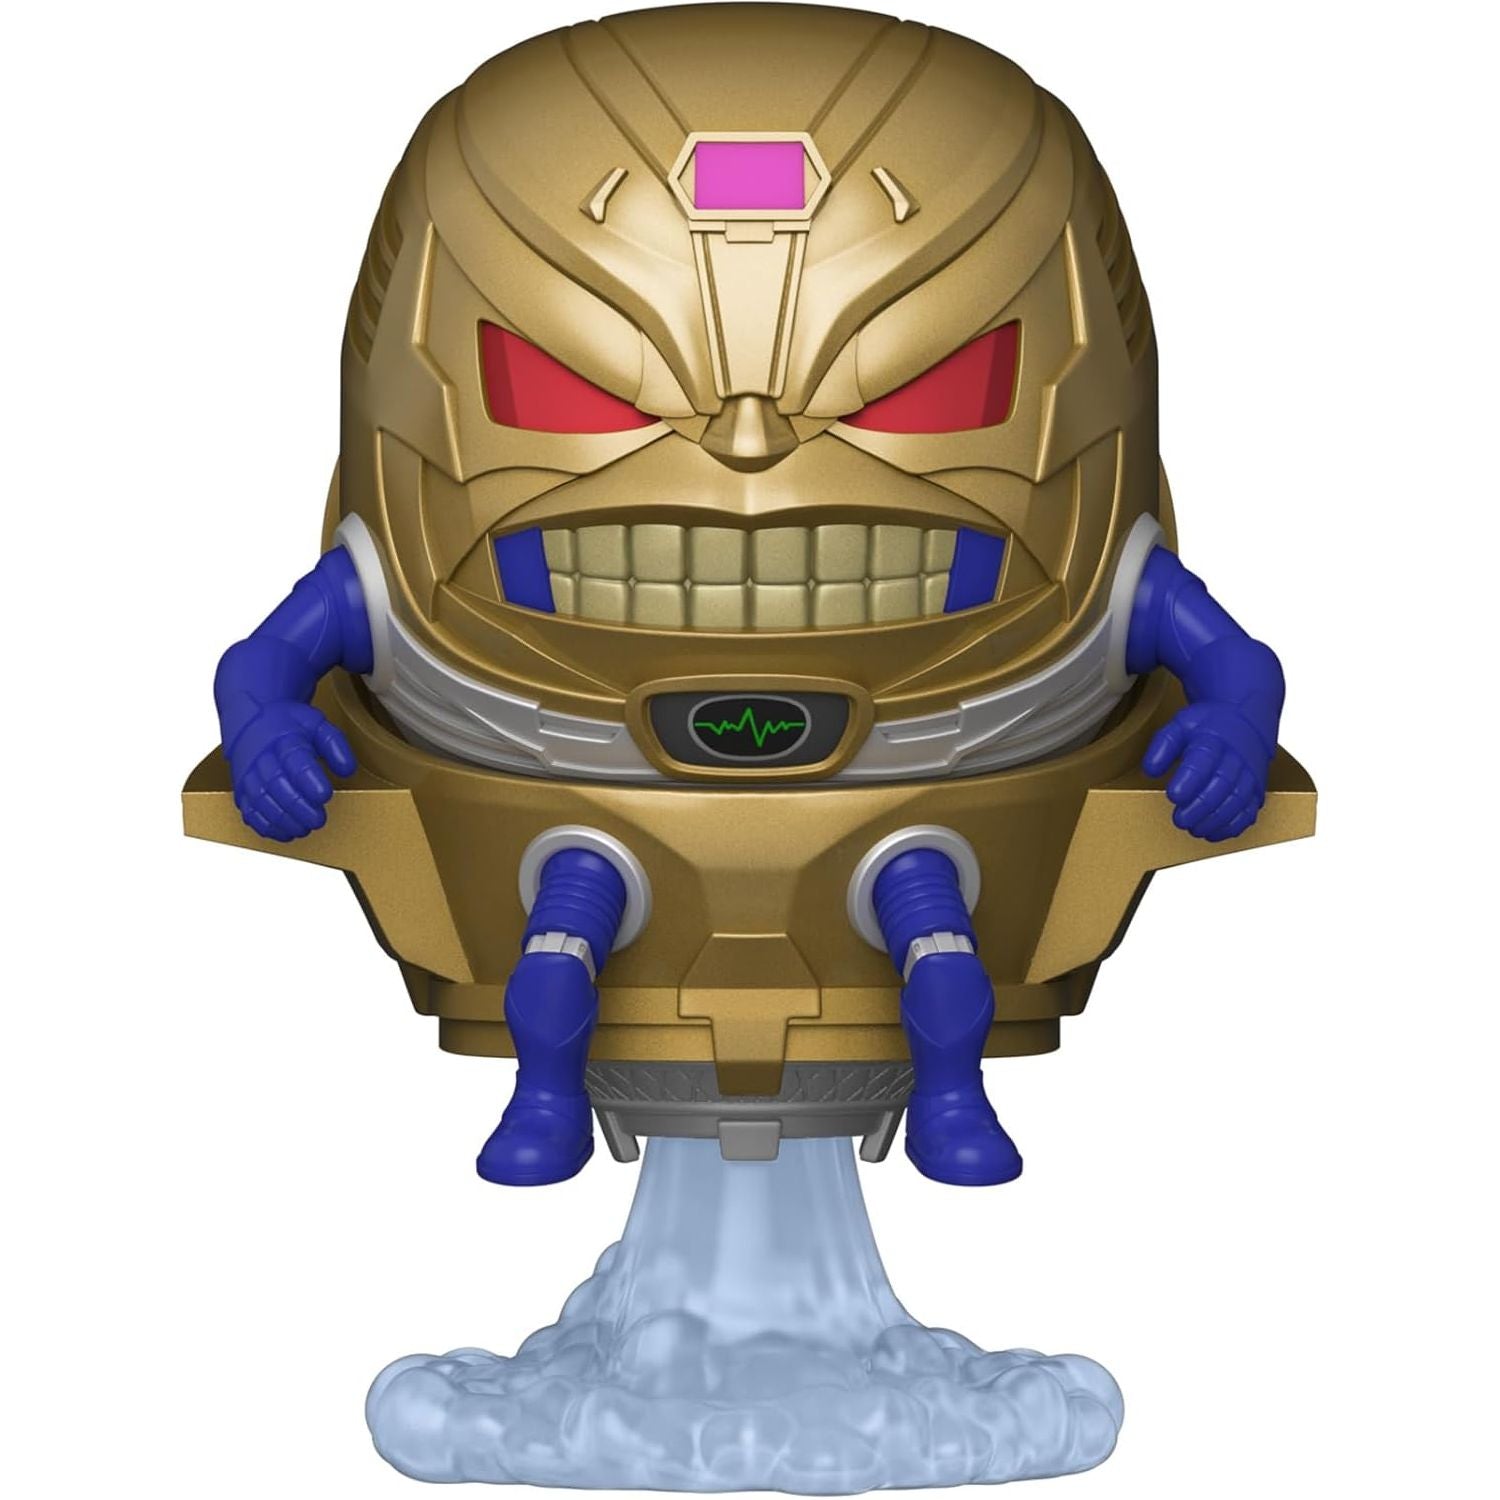 Funko Pop! Marvel Ant-Man and The Wasp Quantumania - M.O.D.O.K.